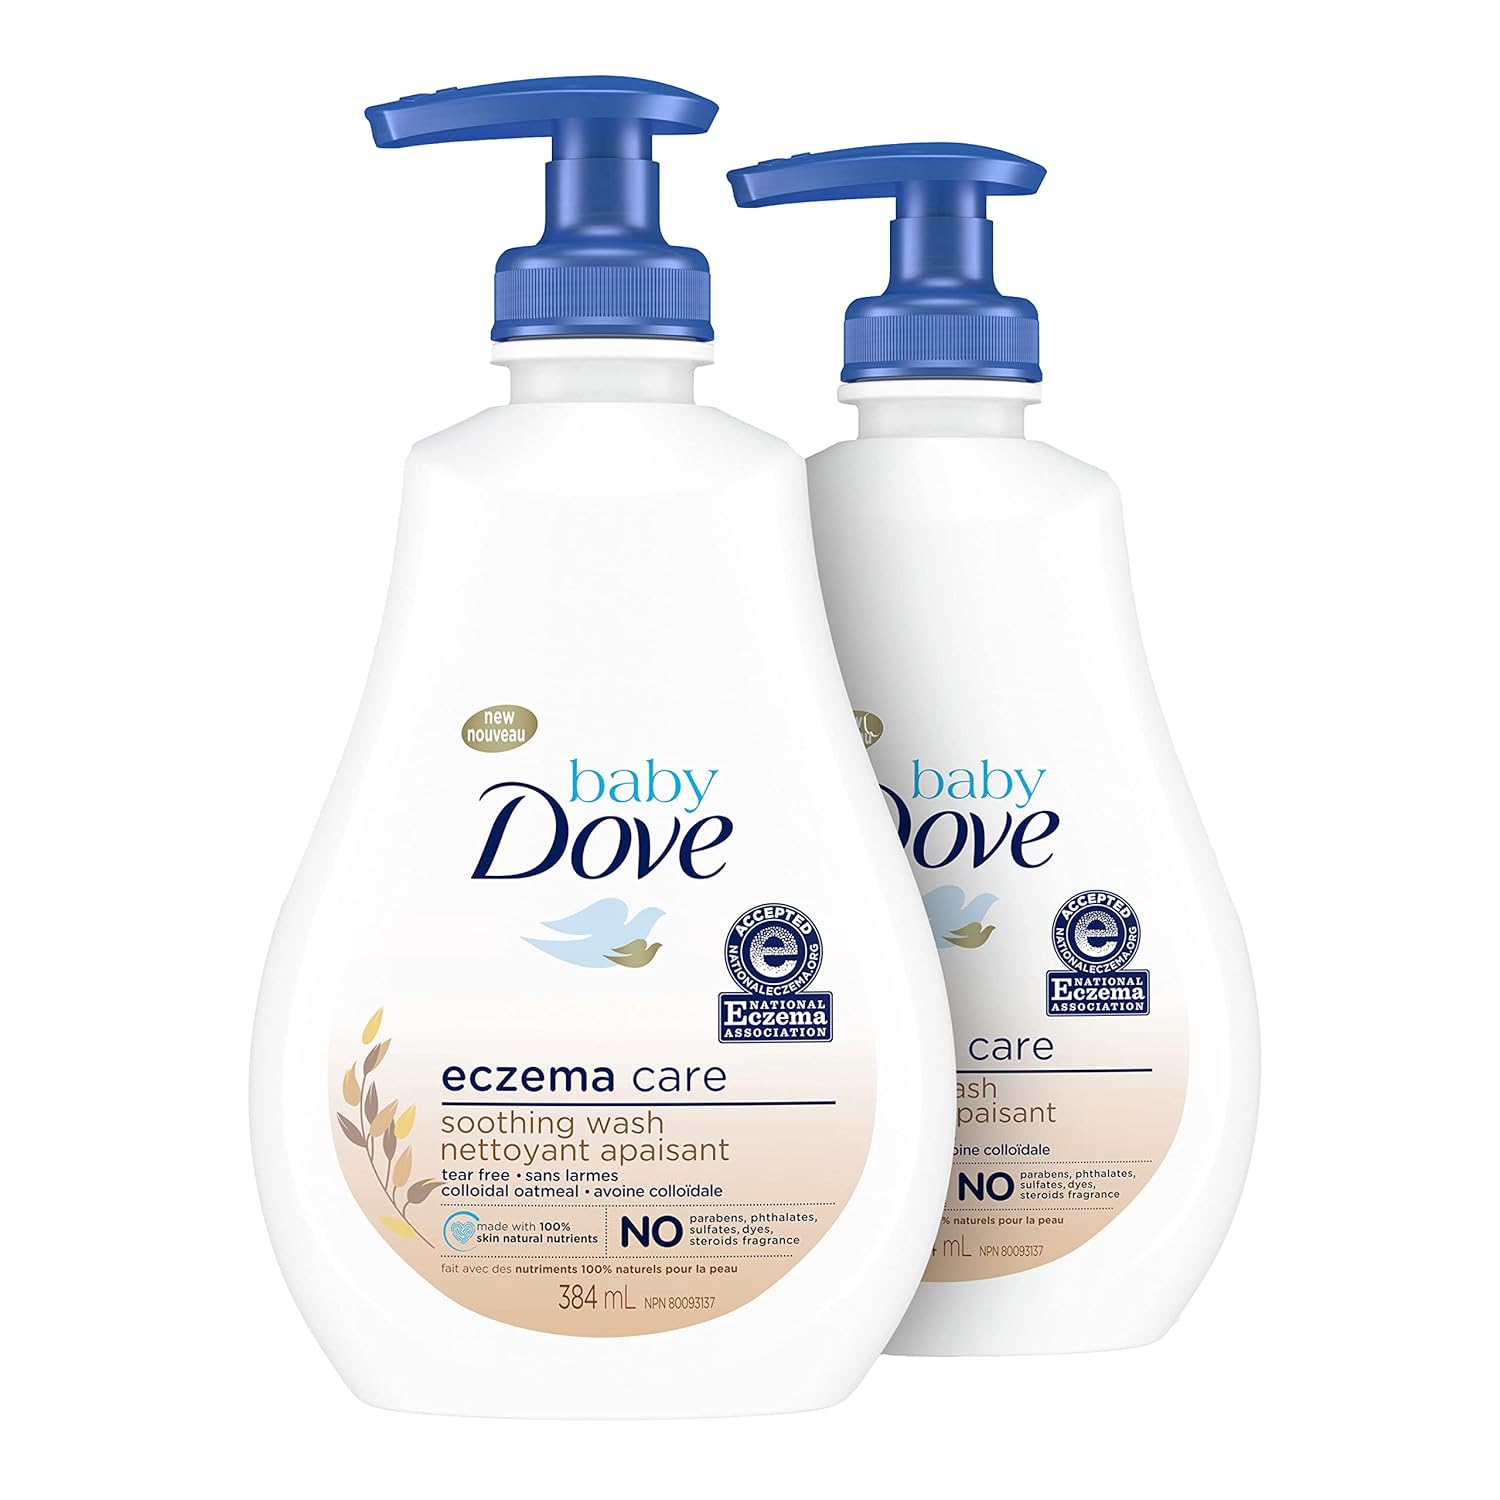 Baby Dove Soothing Baby Body Wash Eczema Care 2 Count To Soothe Delicate Baby Skin No Artificial Perfume or Color, Paraben Free, Phthalate Free 13 oz